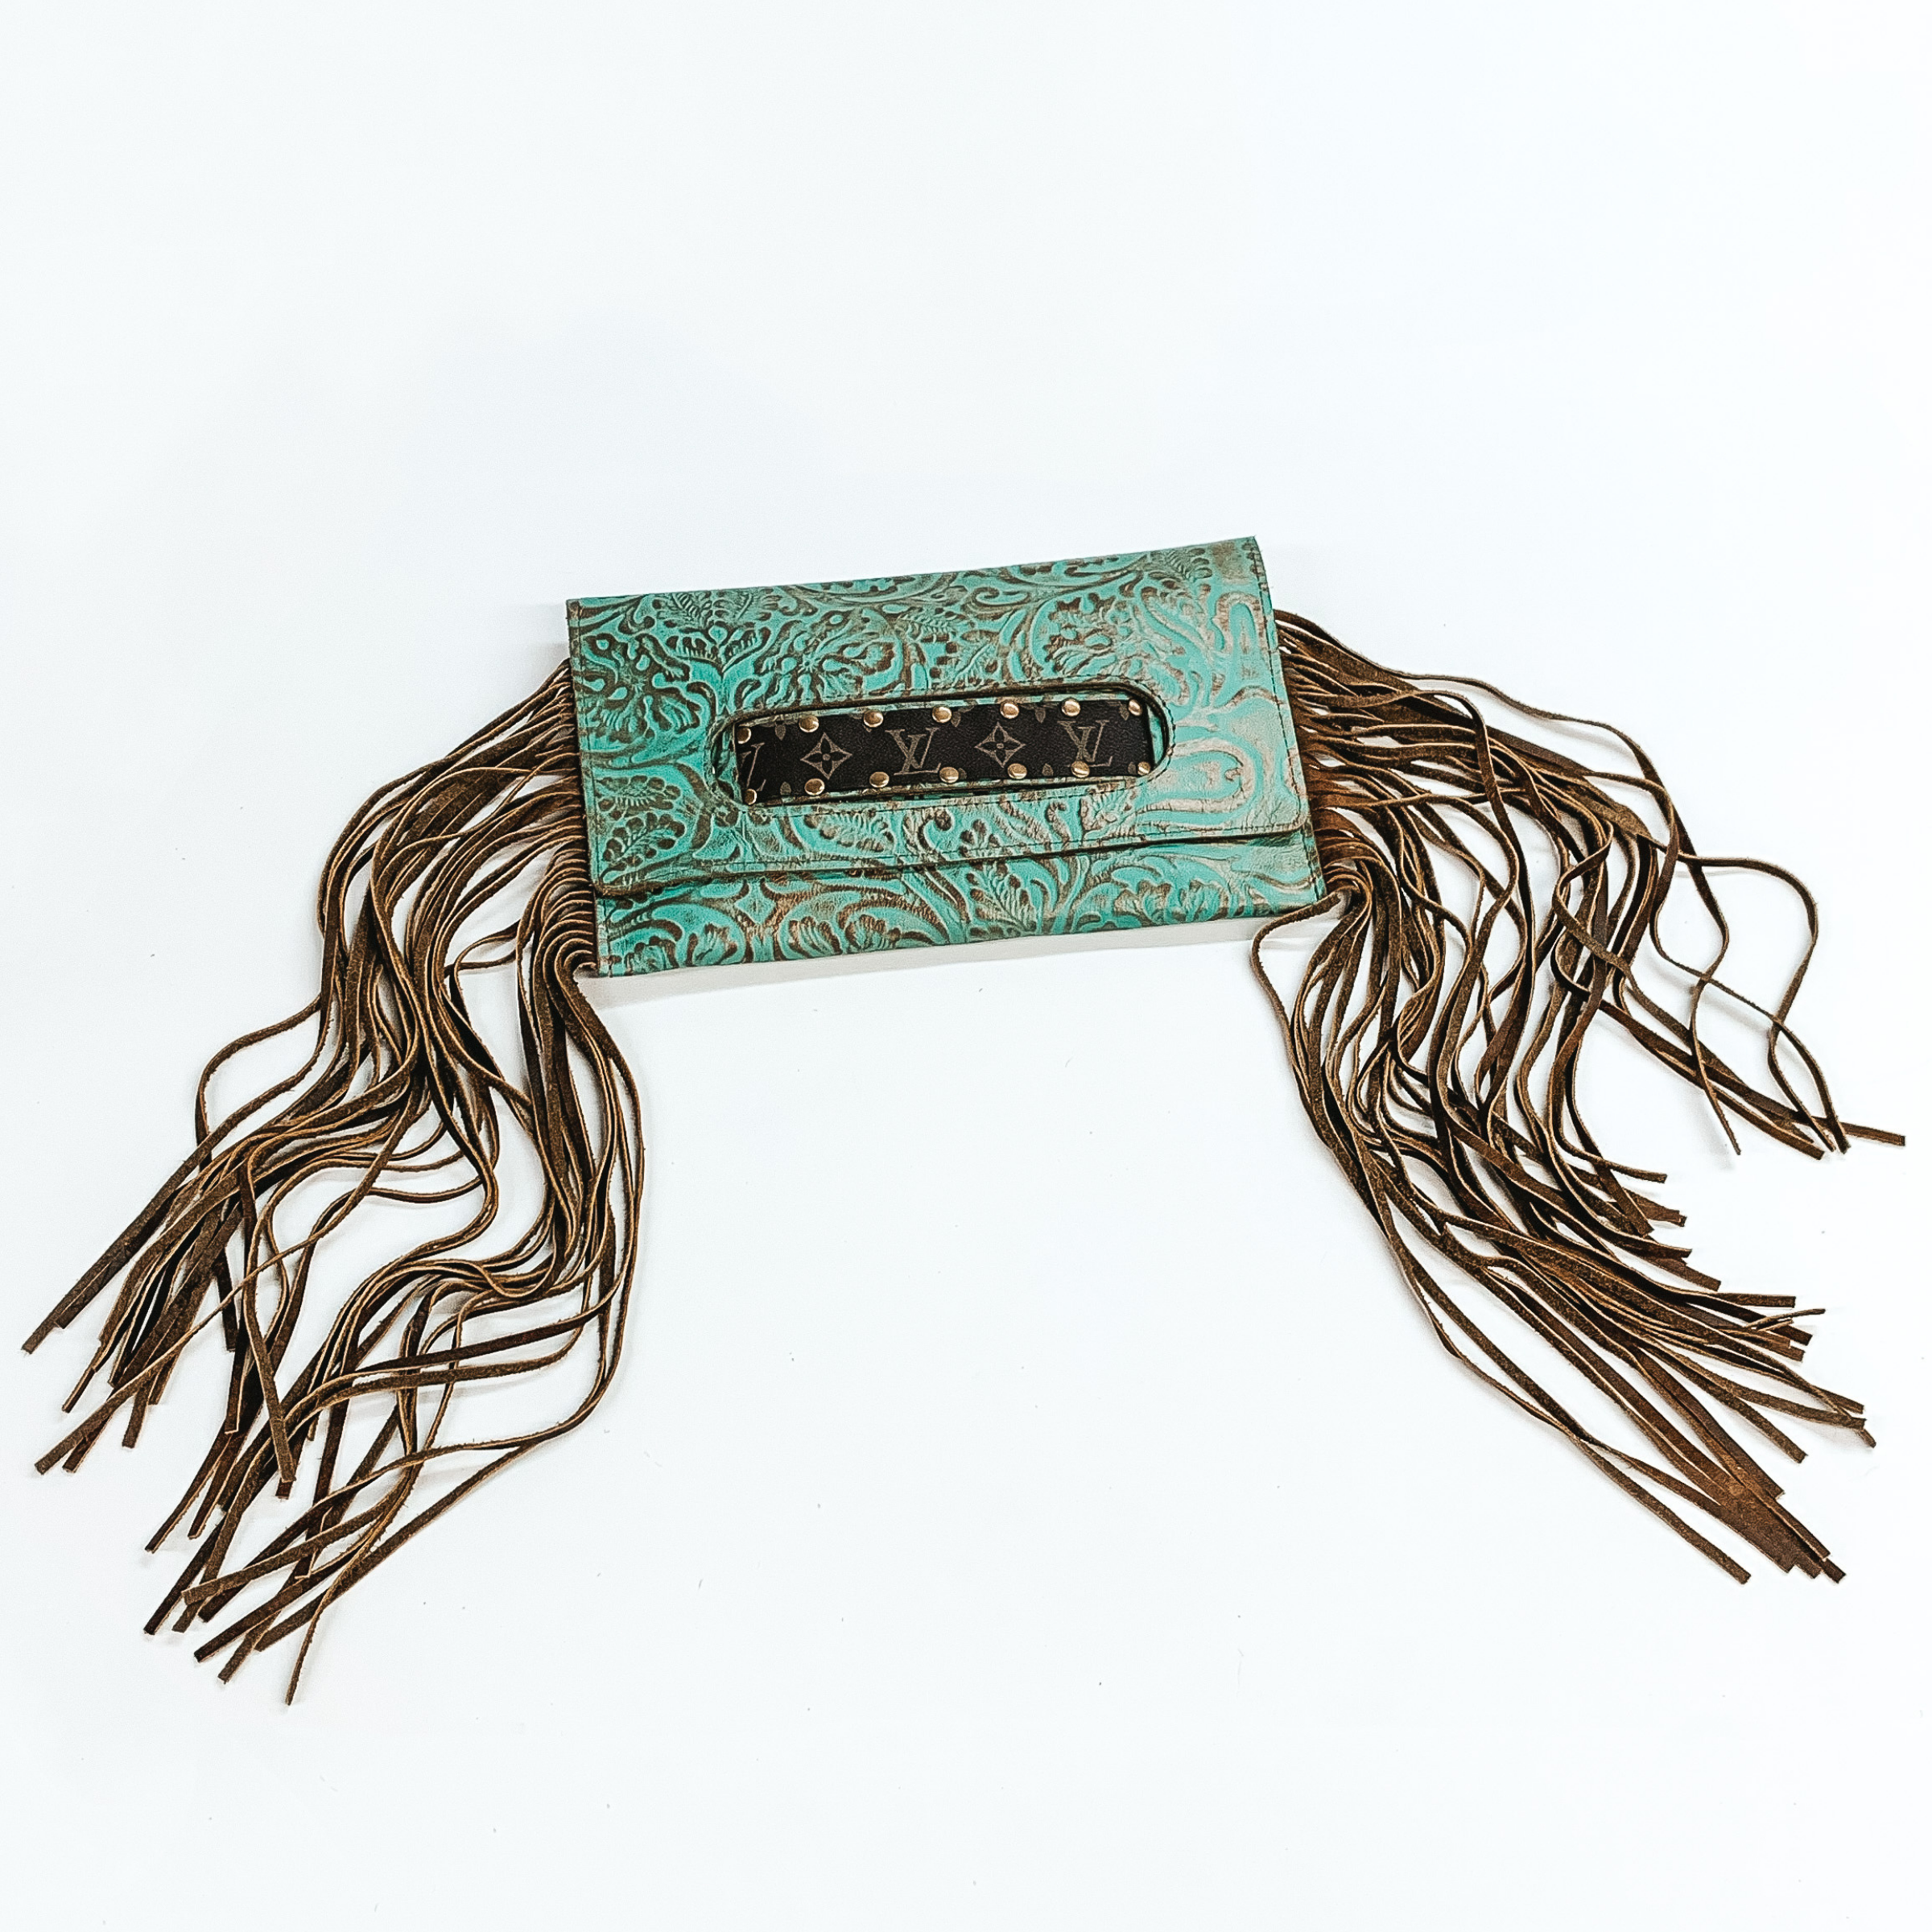 Keep It Gypsy | Sloan Turquoise Clutch with Genuine Leather Fringe - Giddy Up Glamour Boutique